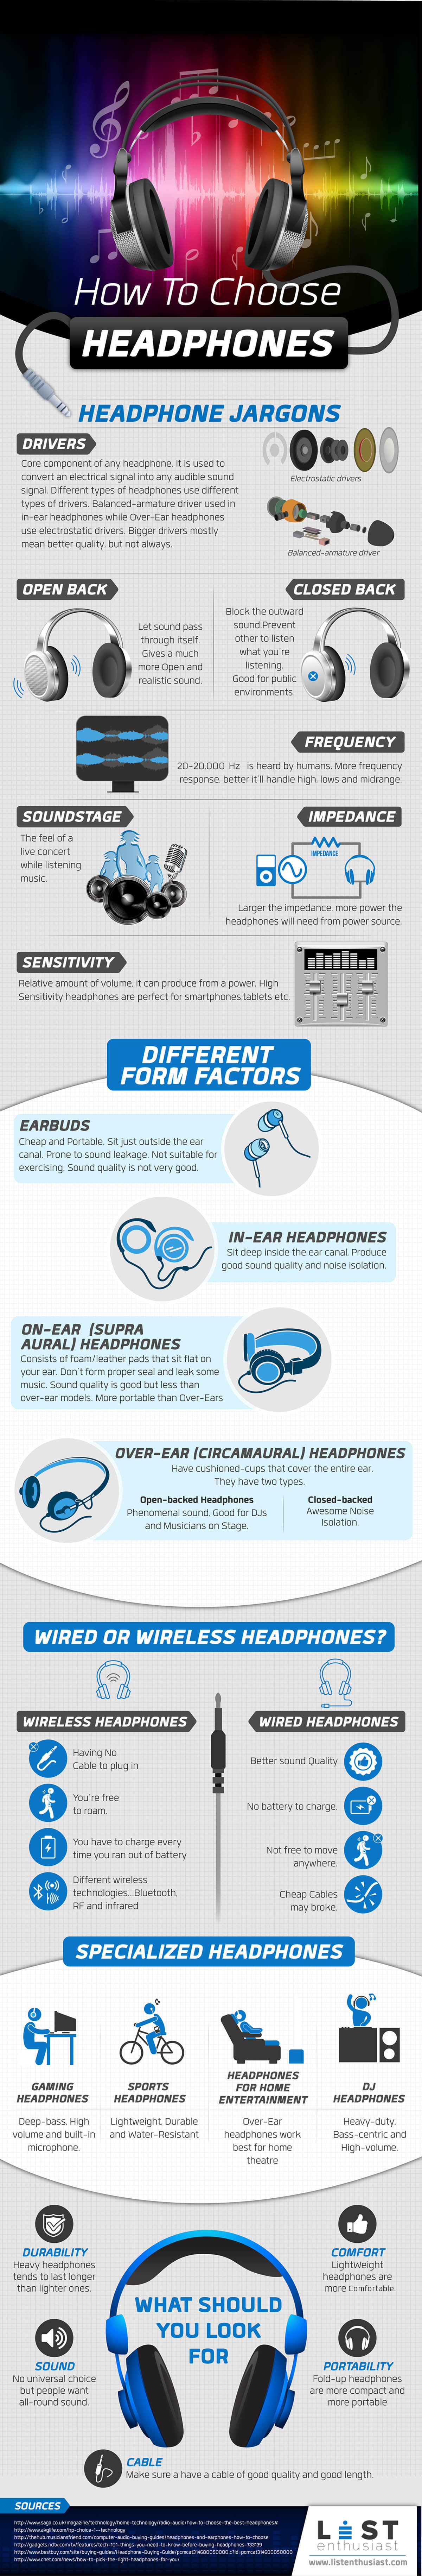 How to Choose Headphones That Suit You